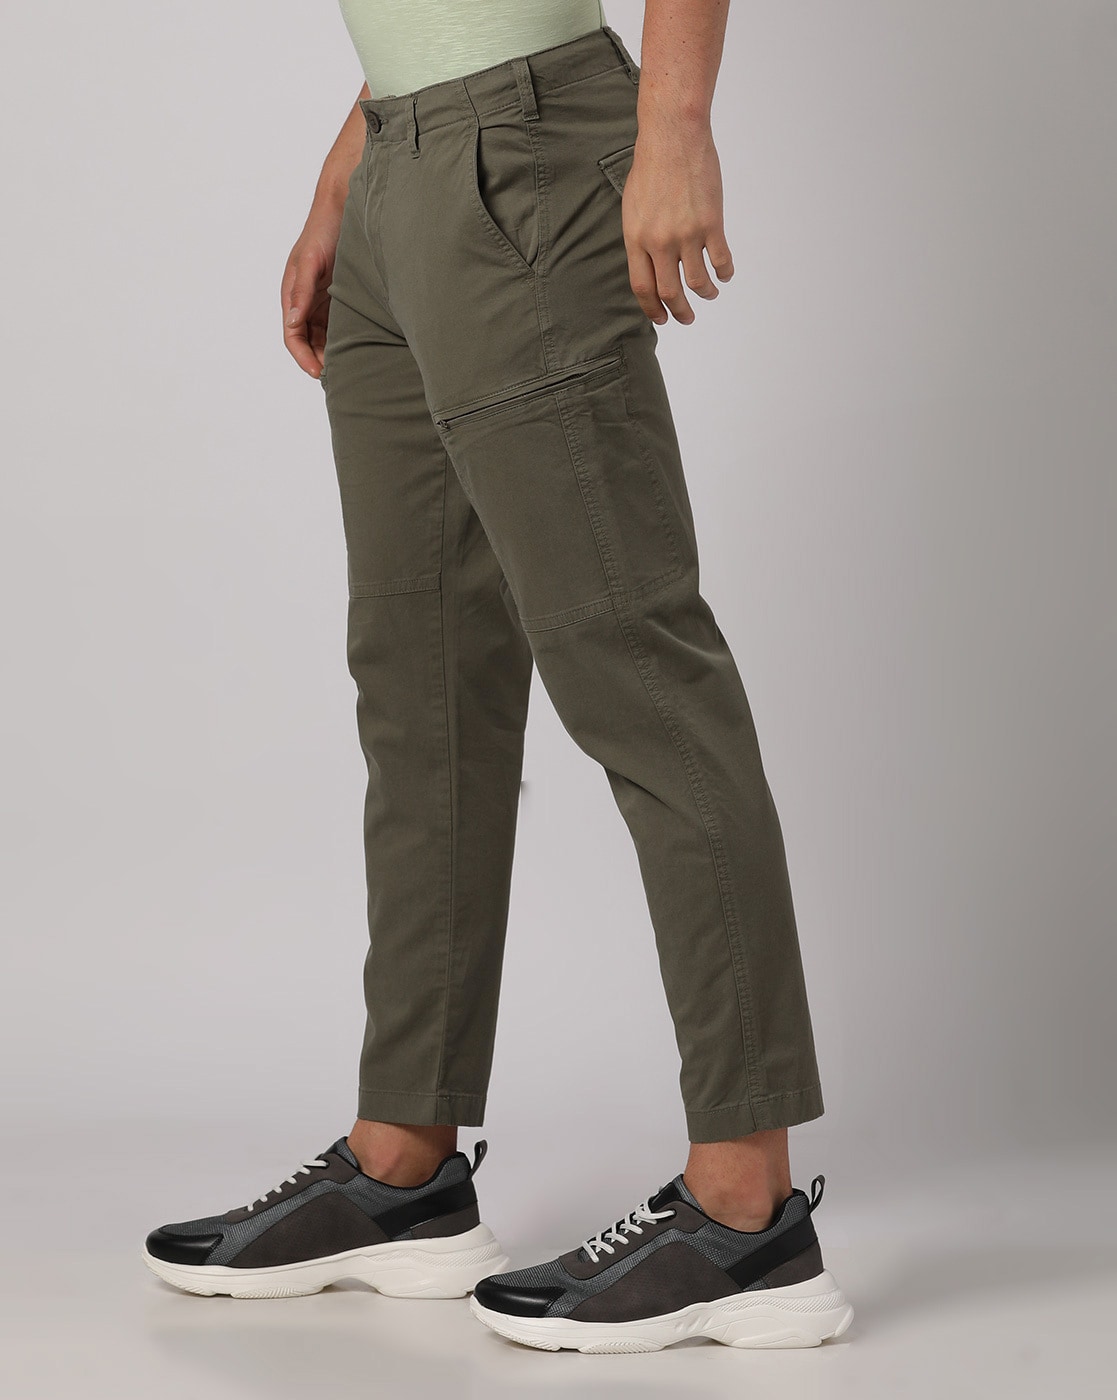 Men's Lycra Cargo Pant with Double Pocket in Black